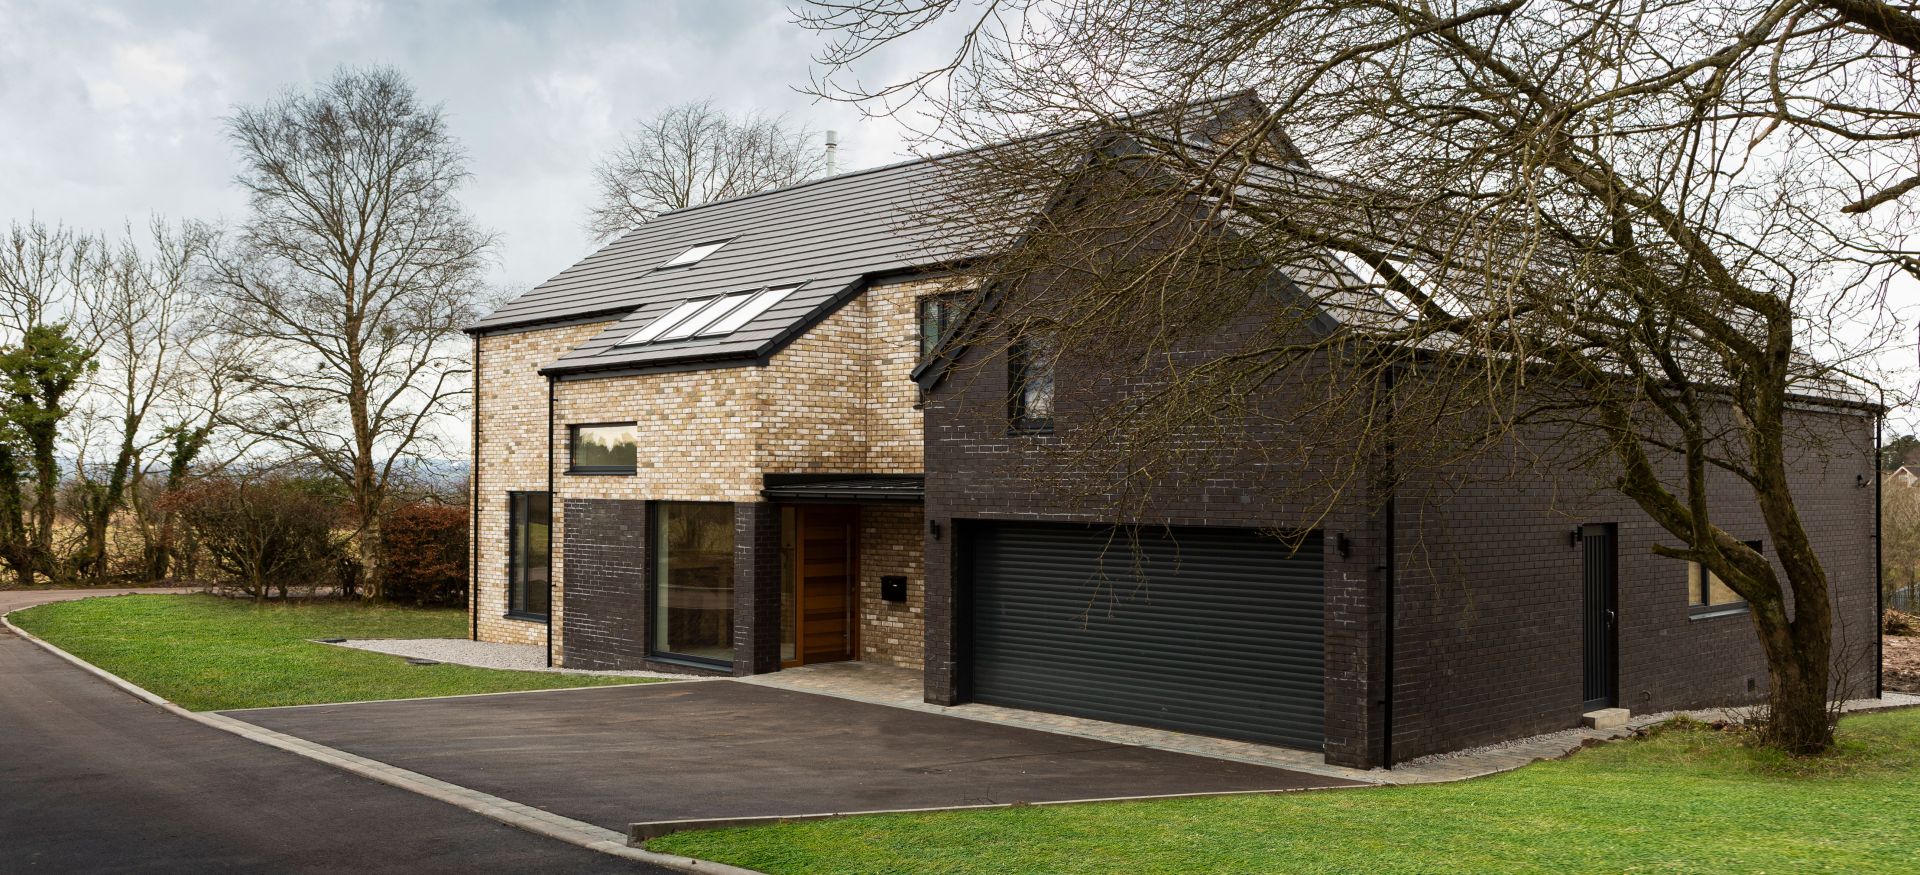 Lawrie Construction - award winning self build properties, conversions and extensions